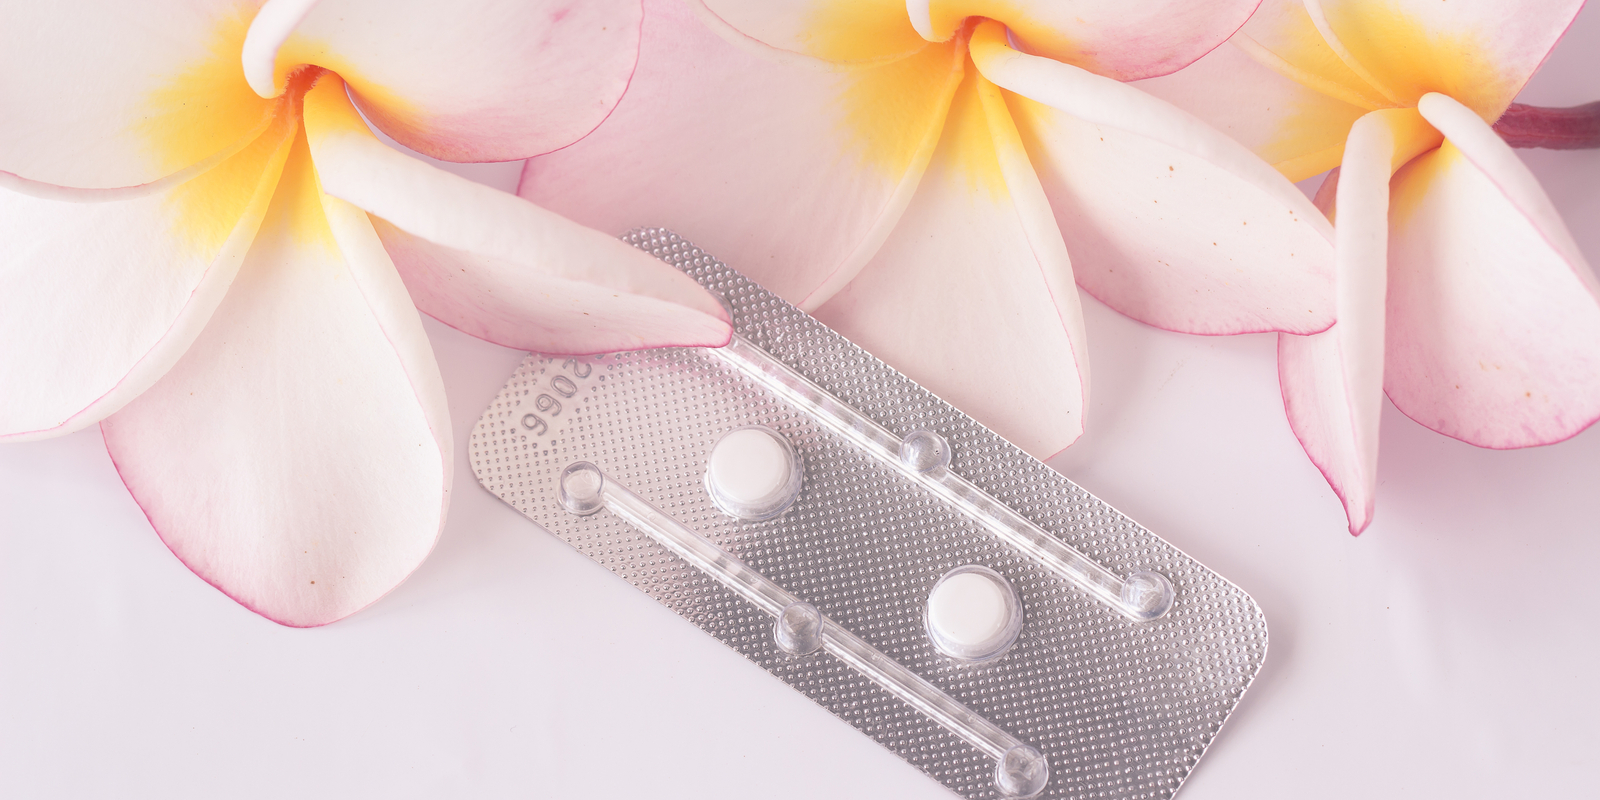 What Are Emergency Contraceptive Pills